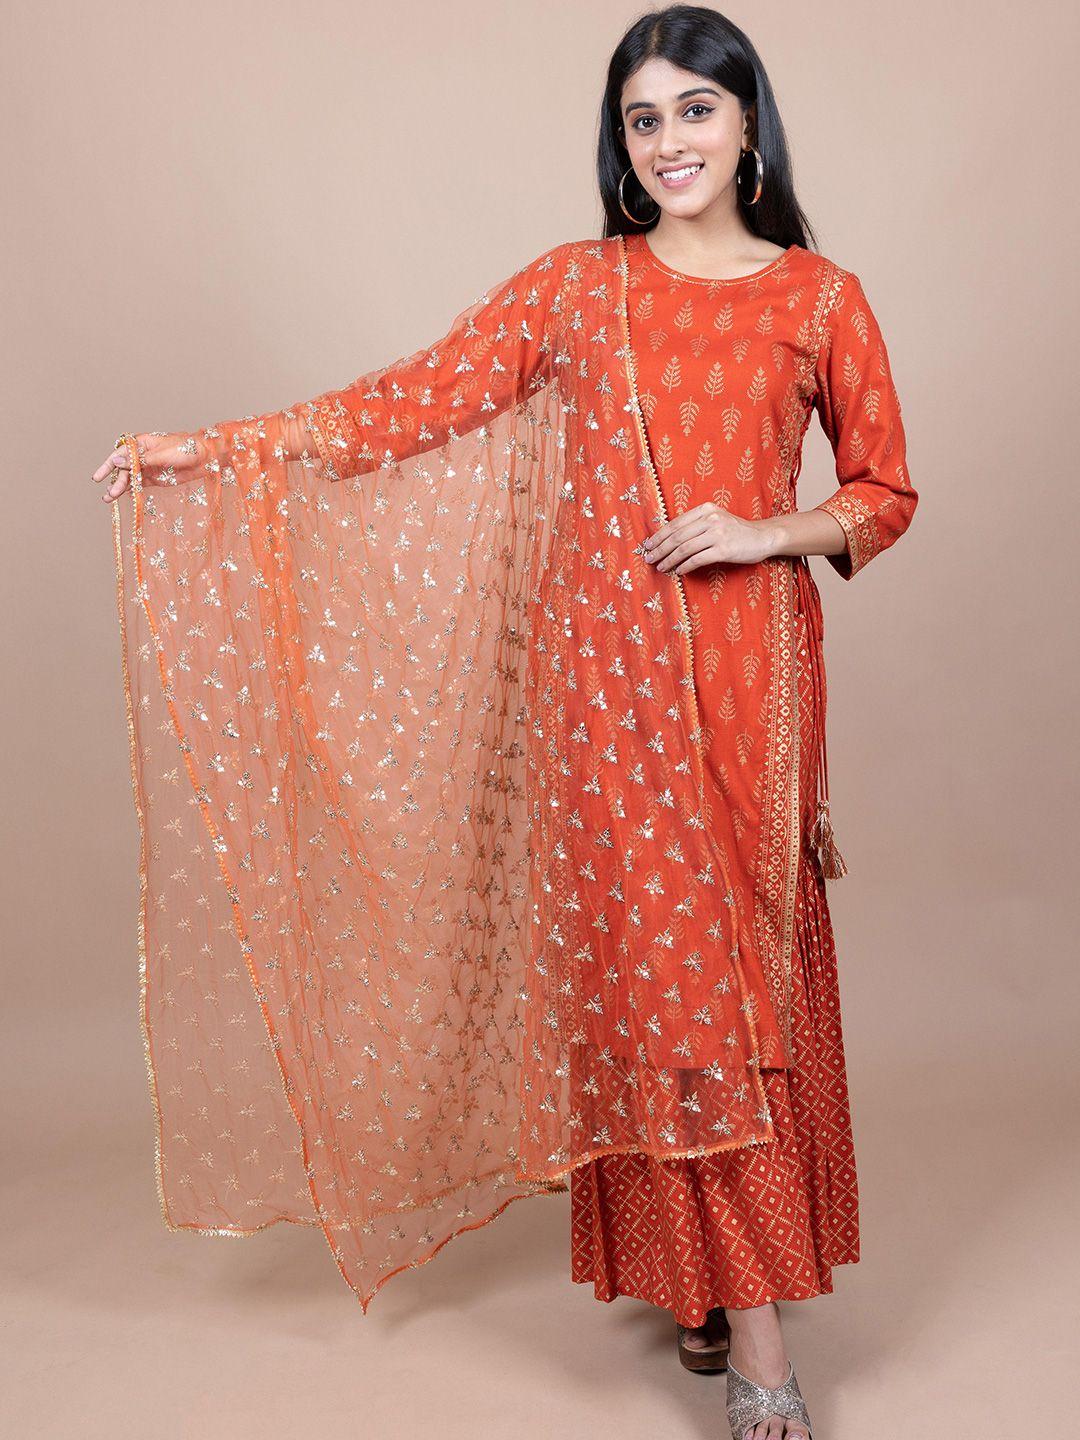 here&now orange & gold-toned ethnic motifs embroidered dupatta